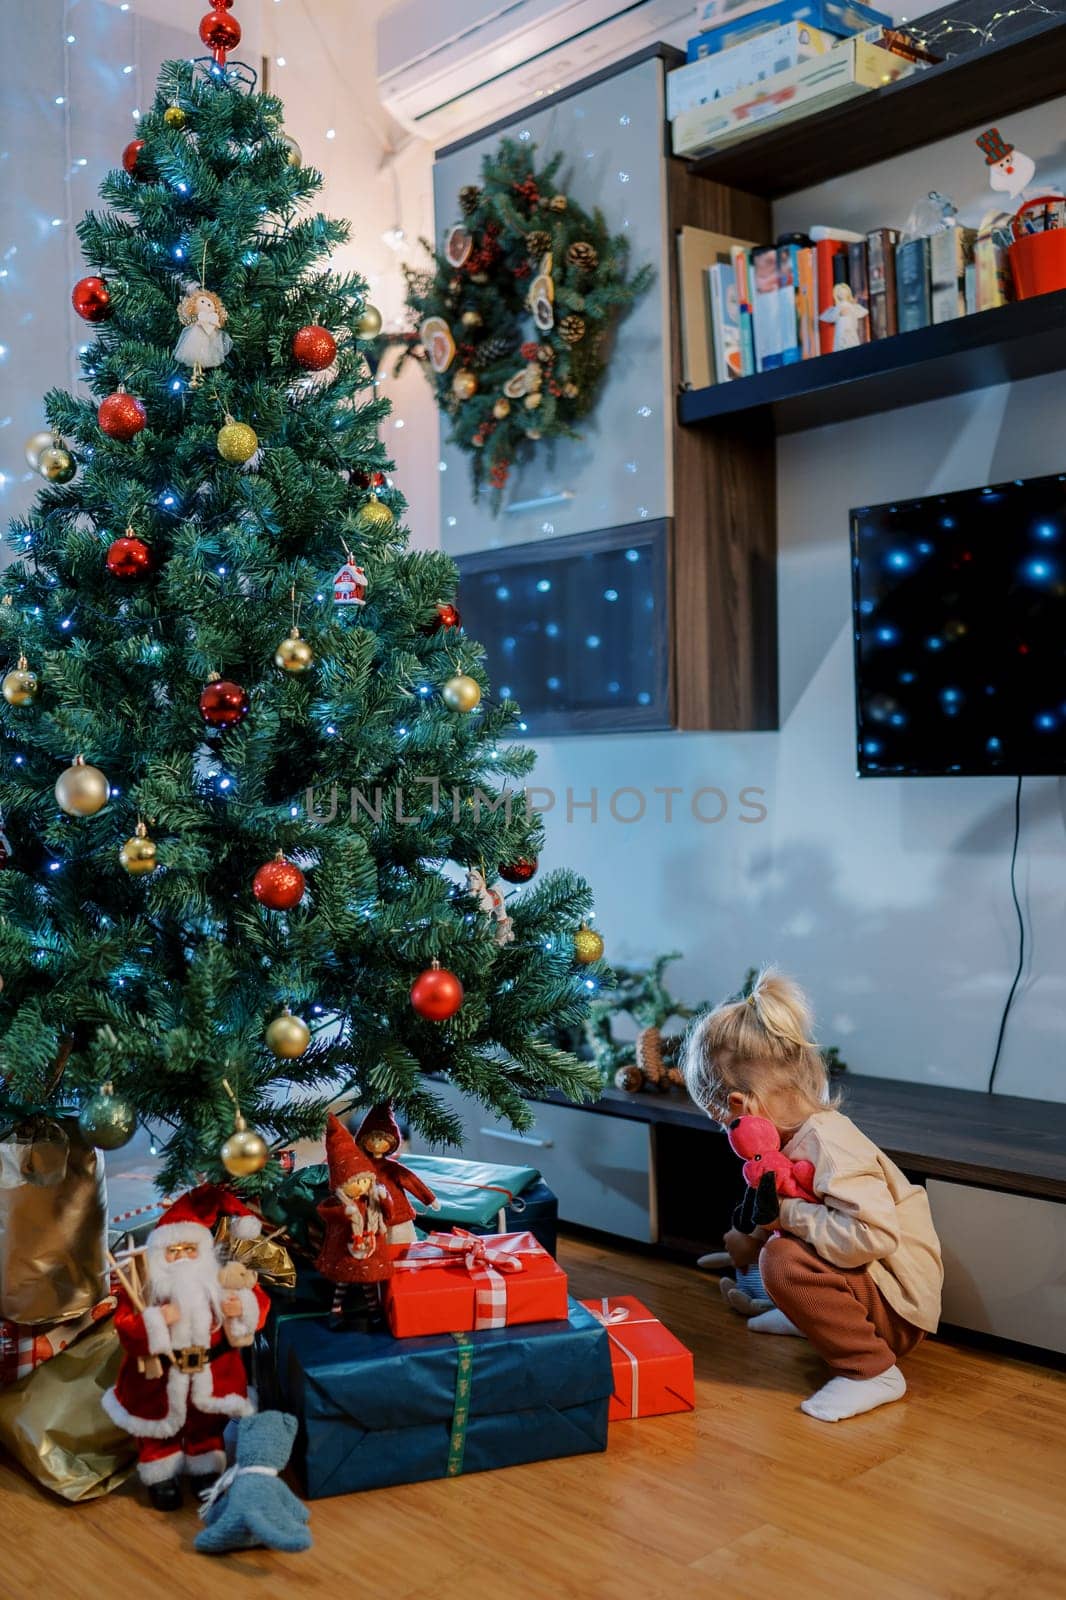 Little girl squats looking at gifts under the tree. Back view by Nadtochiy